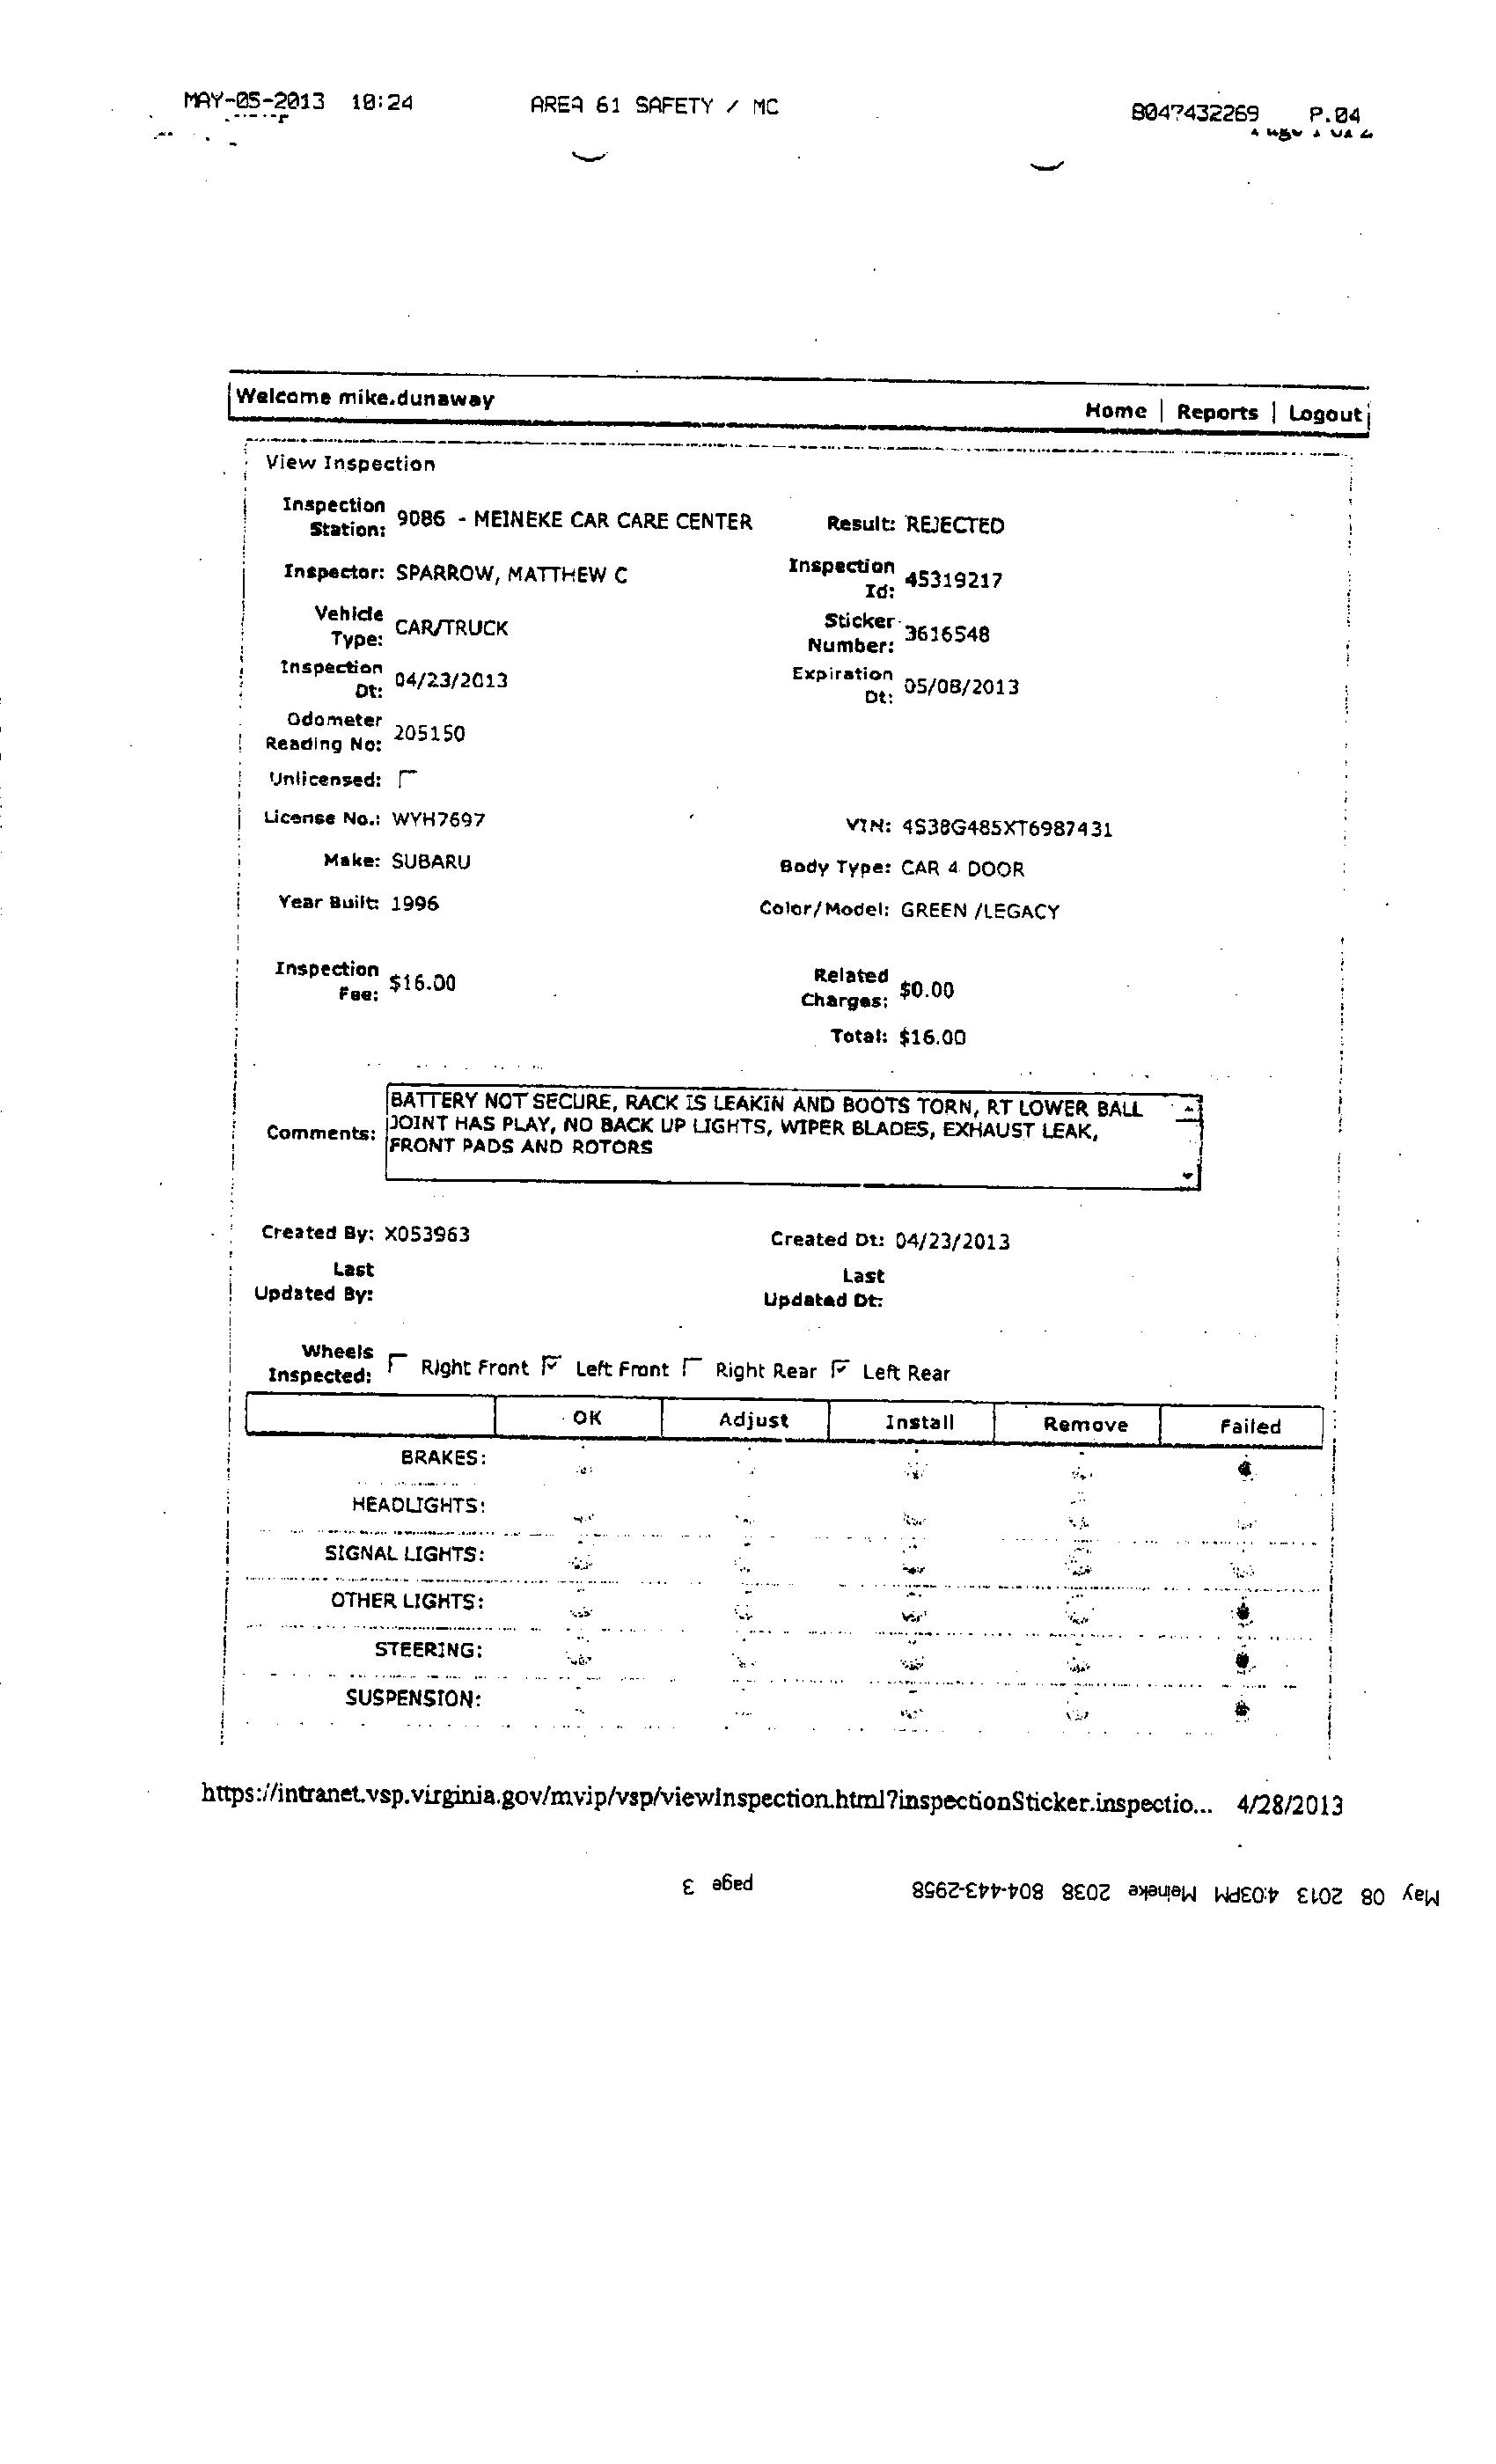 Inspection Report Page 2